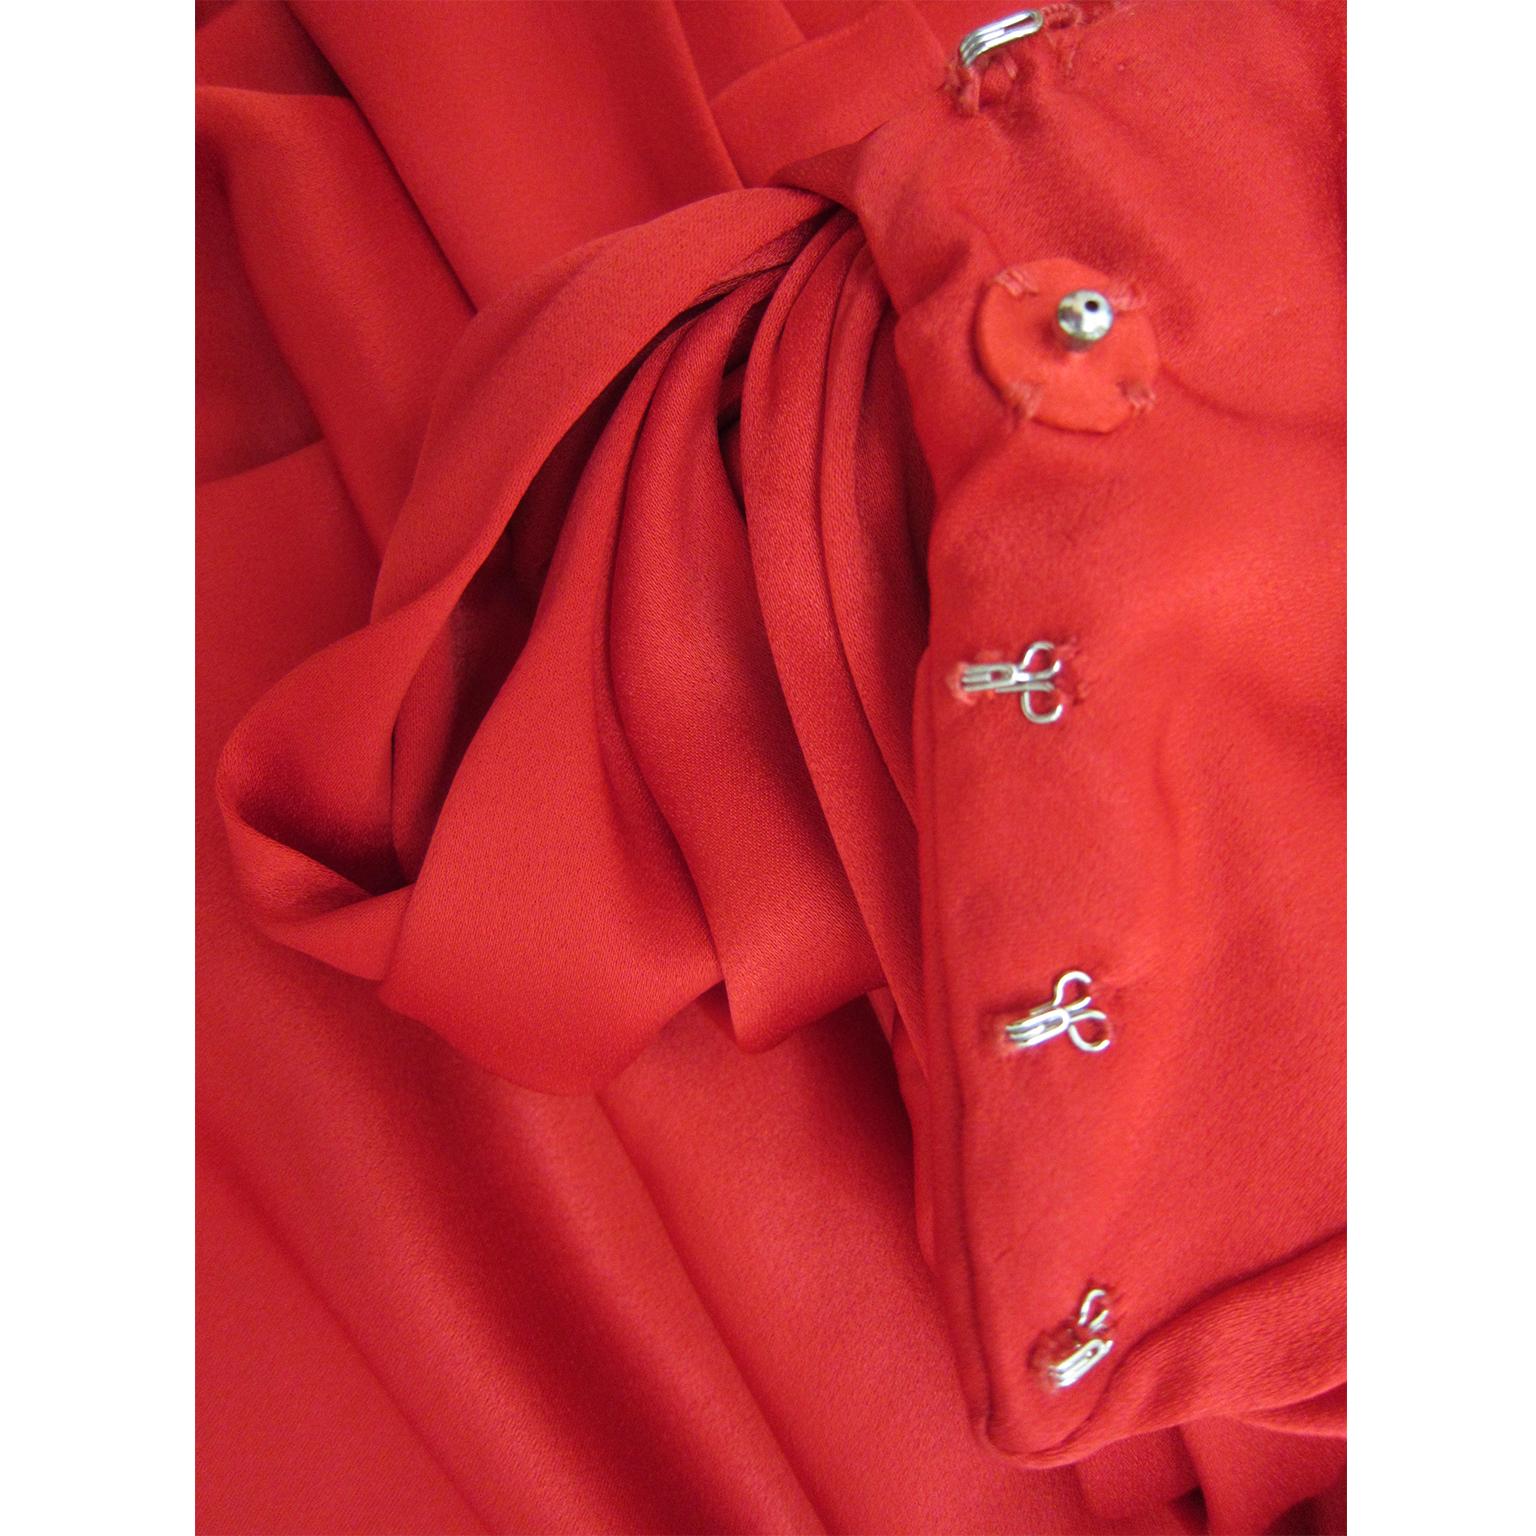 YSL Rive Gauche Royal Red Satin Skirt With Bow 1985 3